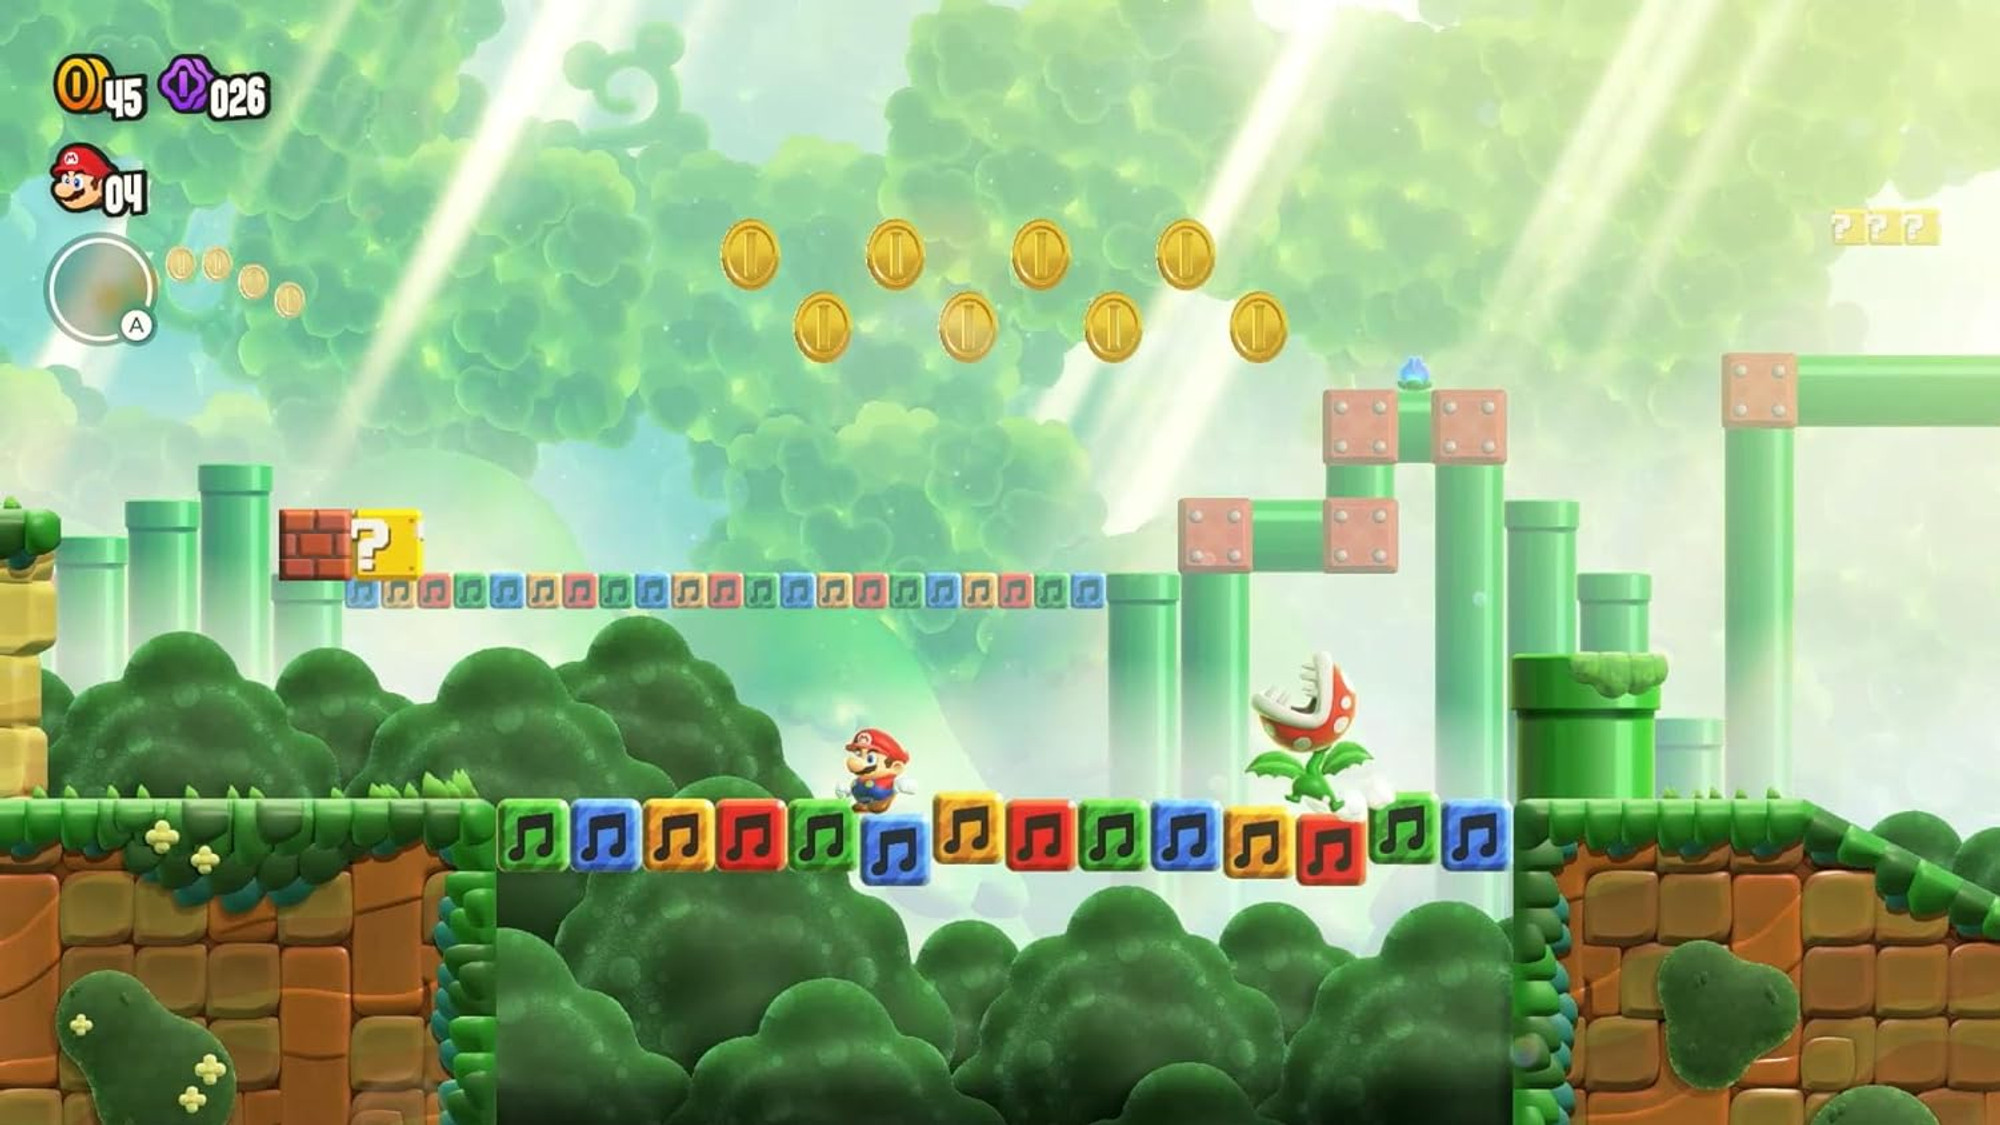 Nintendo of America on X: Join us for an in-depth look at Mario's latest  2D side-scrolling adventure in the livestreamed Super Mario Bros. Wonder  Direct! 📆 August 31st 🕓 7am PT /